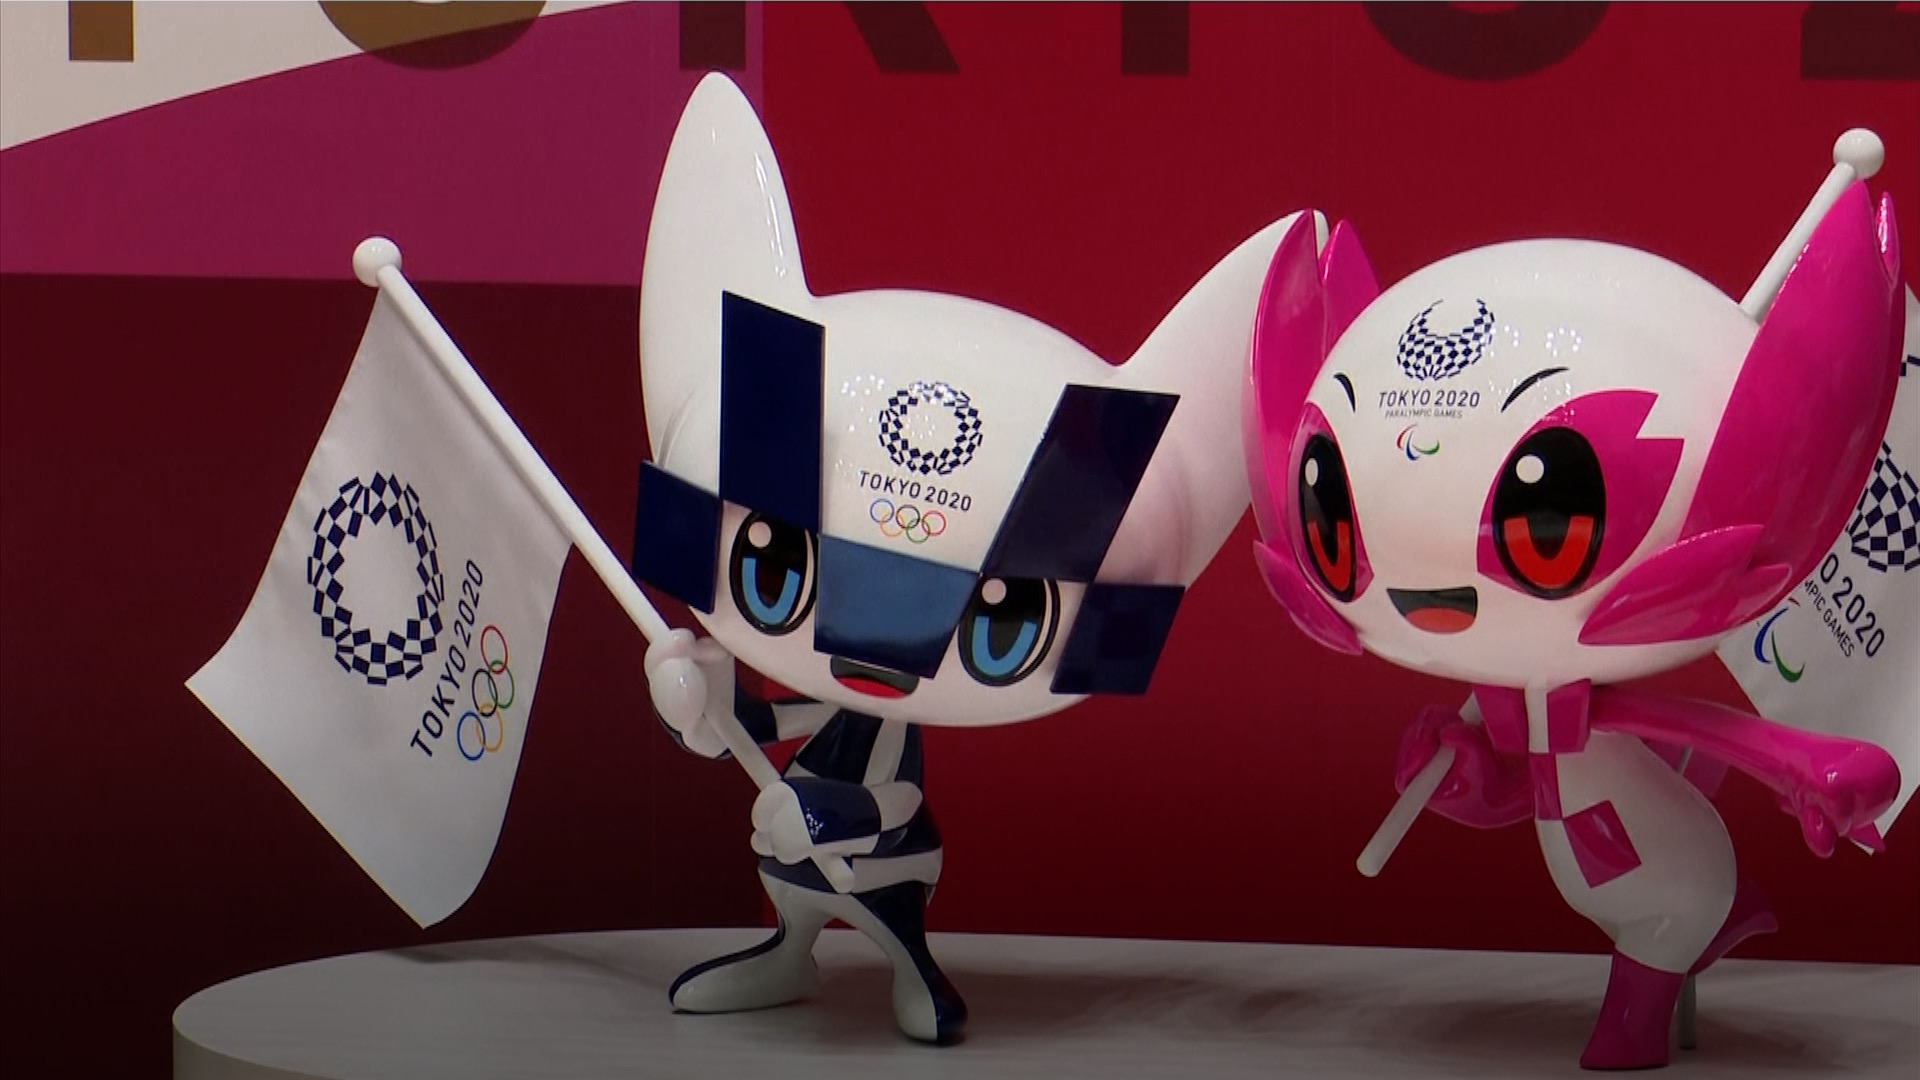 Mascots And Olympics Symbol Unveiled To Mark 100 Days To Tokyo 2020 Cgtn